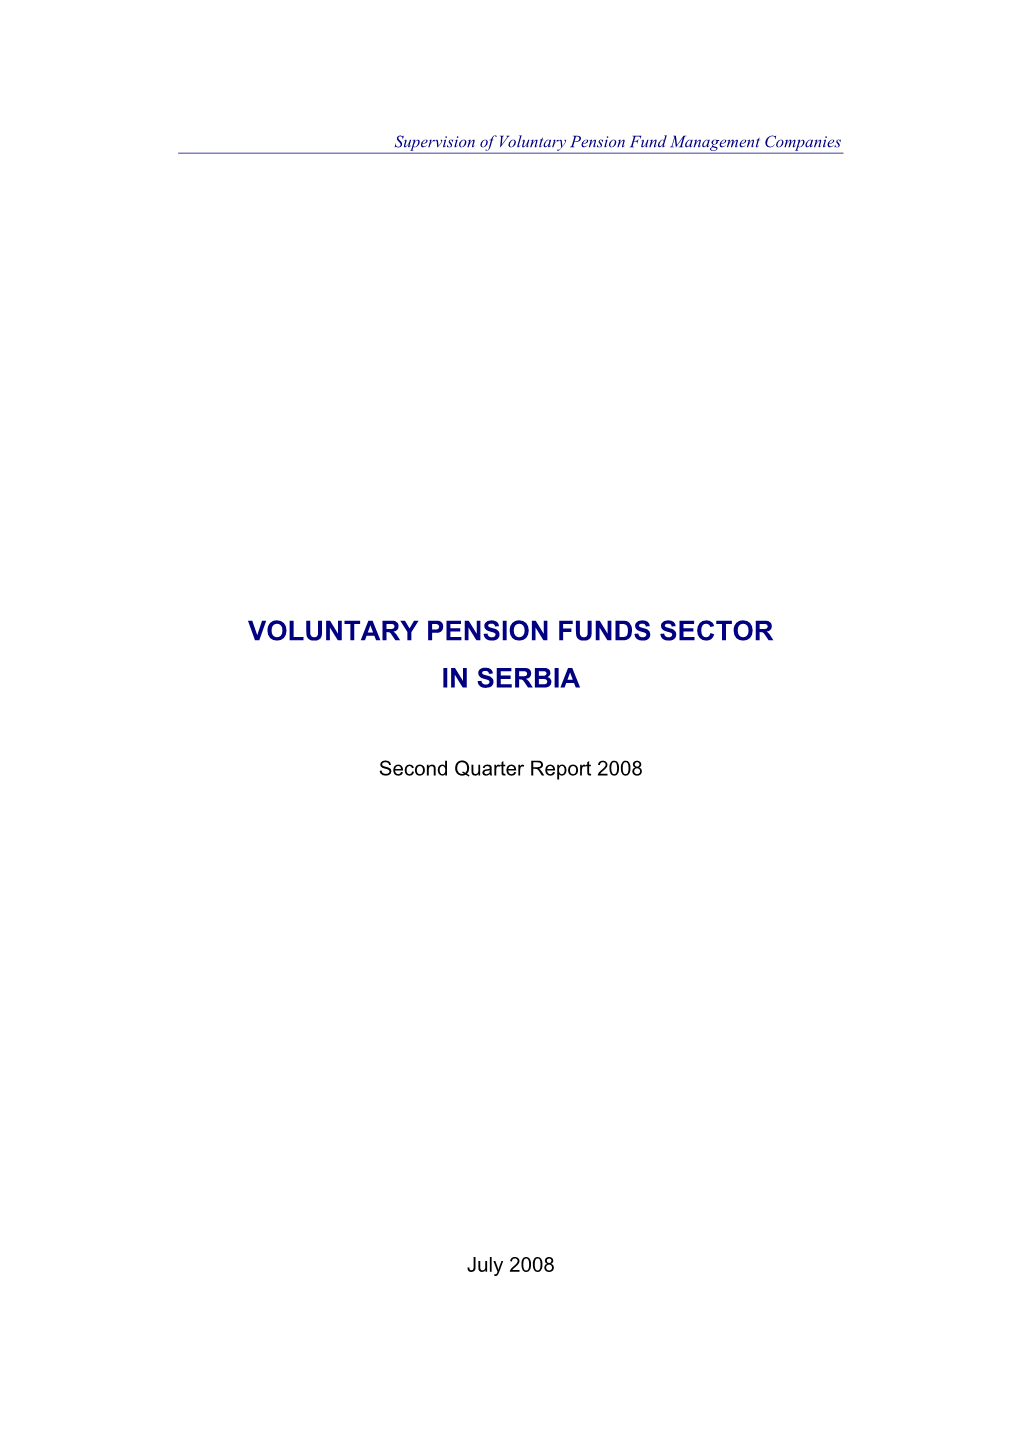 Voluntary Pension Funds Sector in Serbia